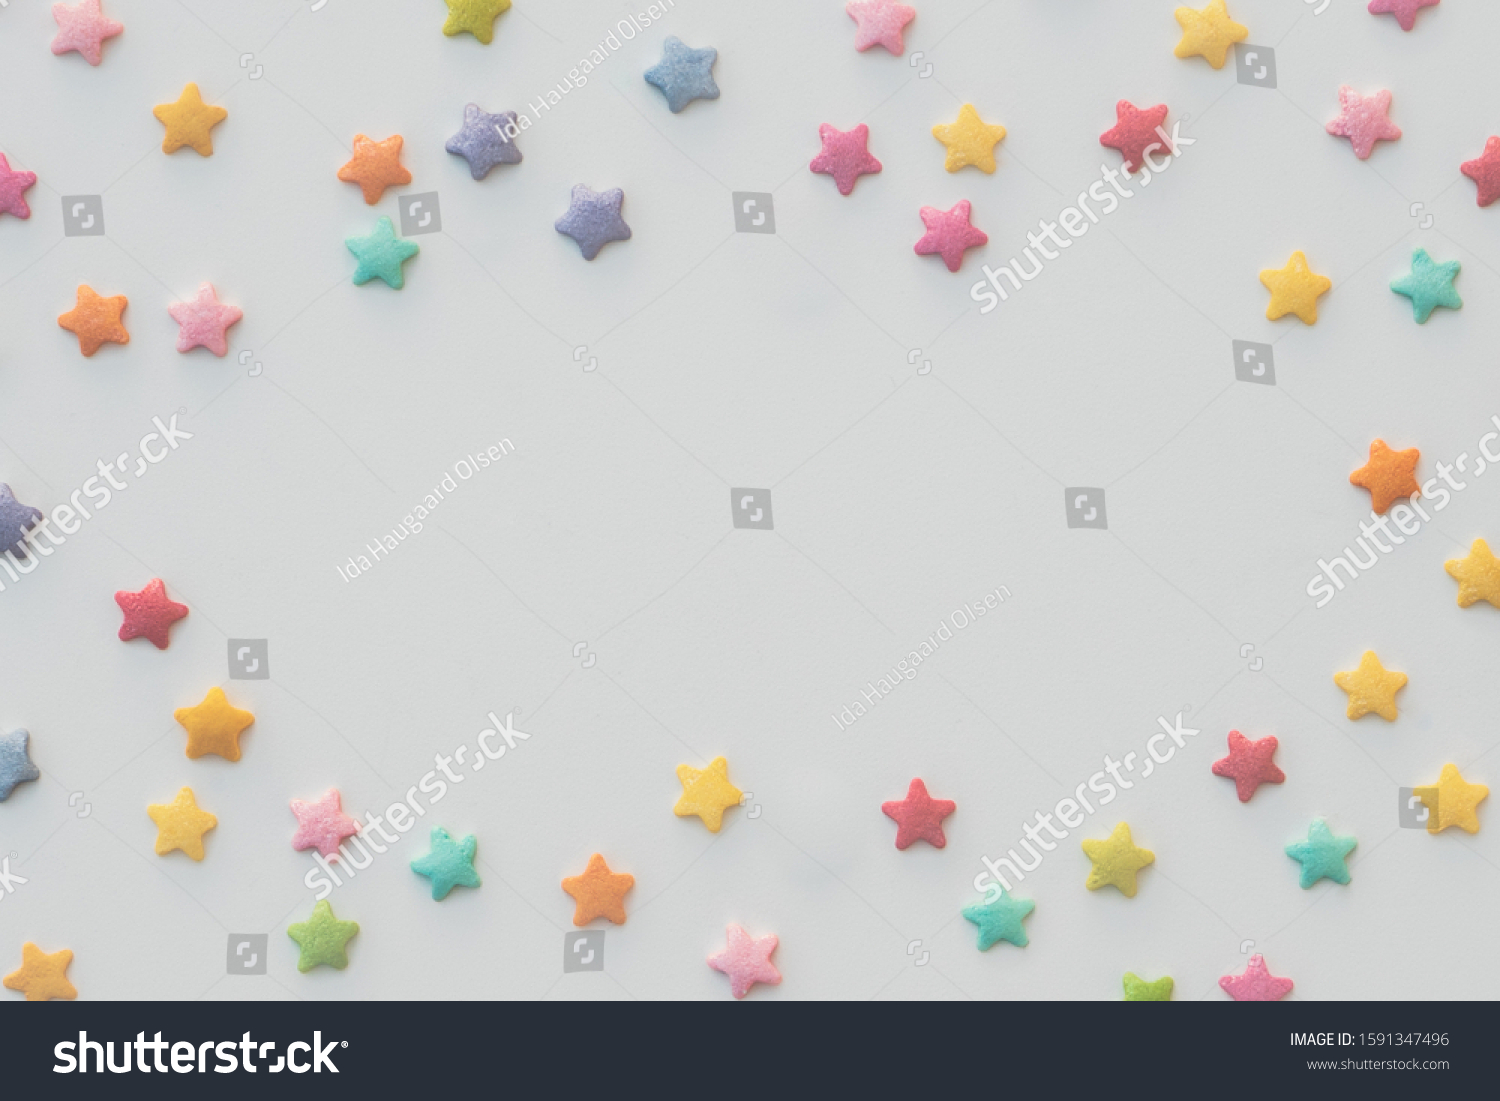 Colorful stars of sprinkles placed as a frame on white background. Room for text or placing an object in the middle. #1591347496